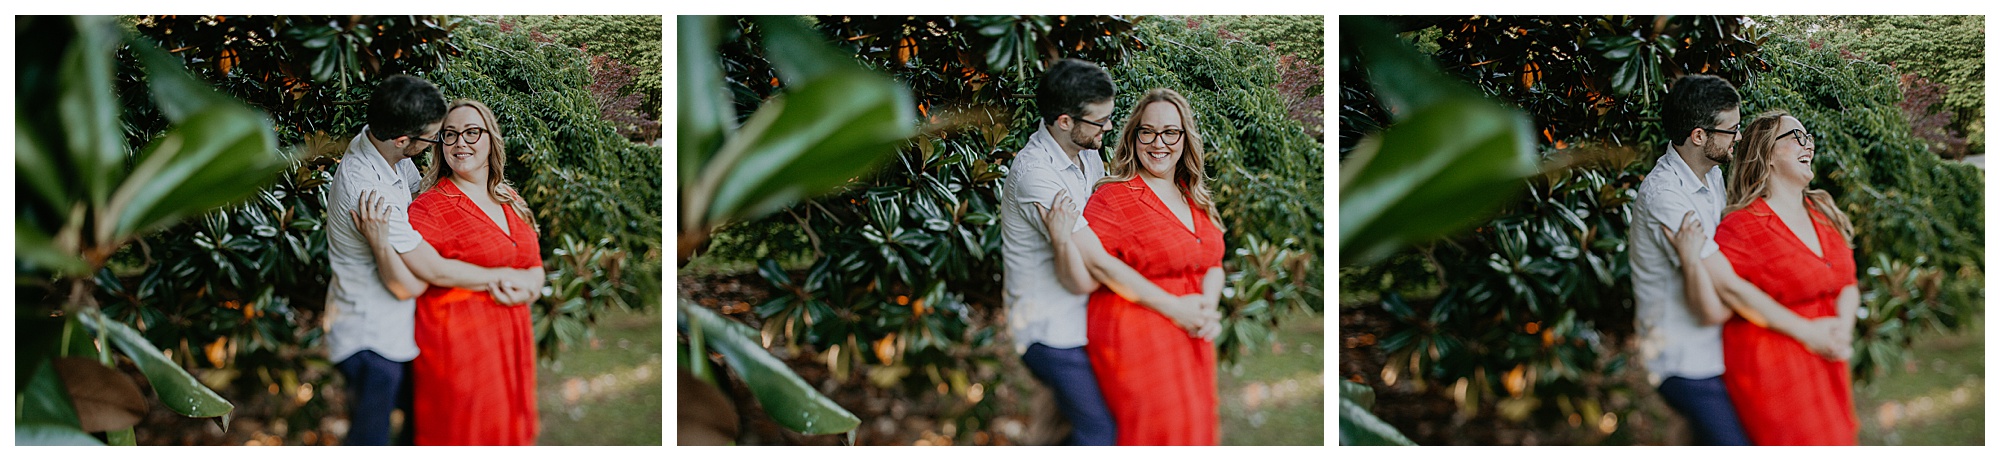 Engaged_couple_by_magnolia_tree_at_Centennial_Park.